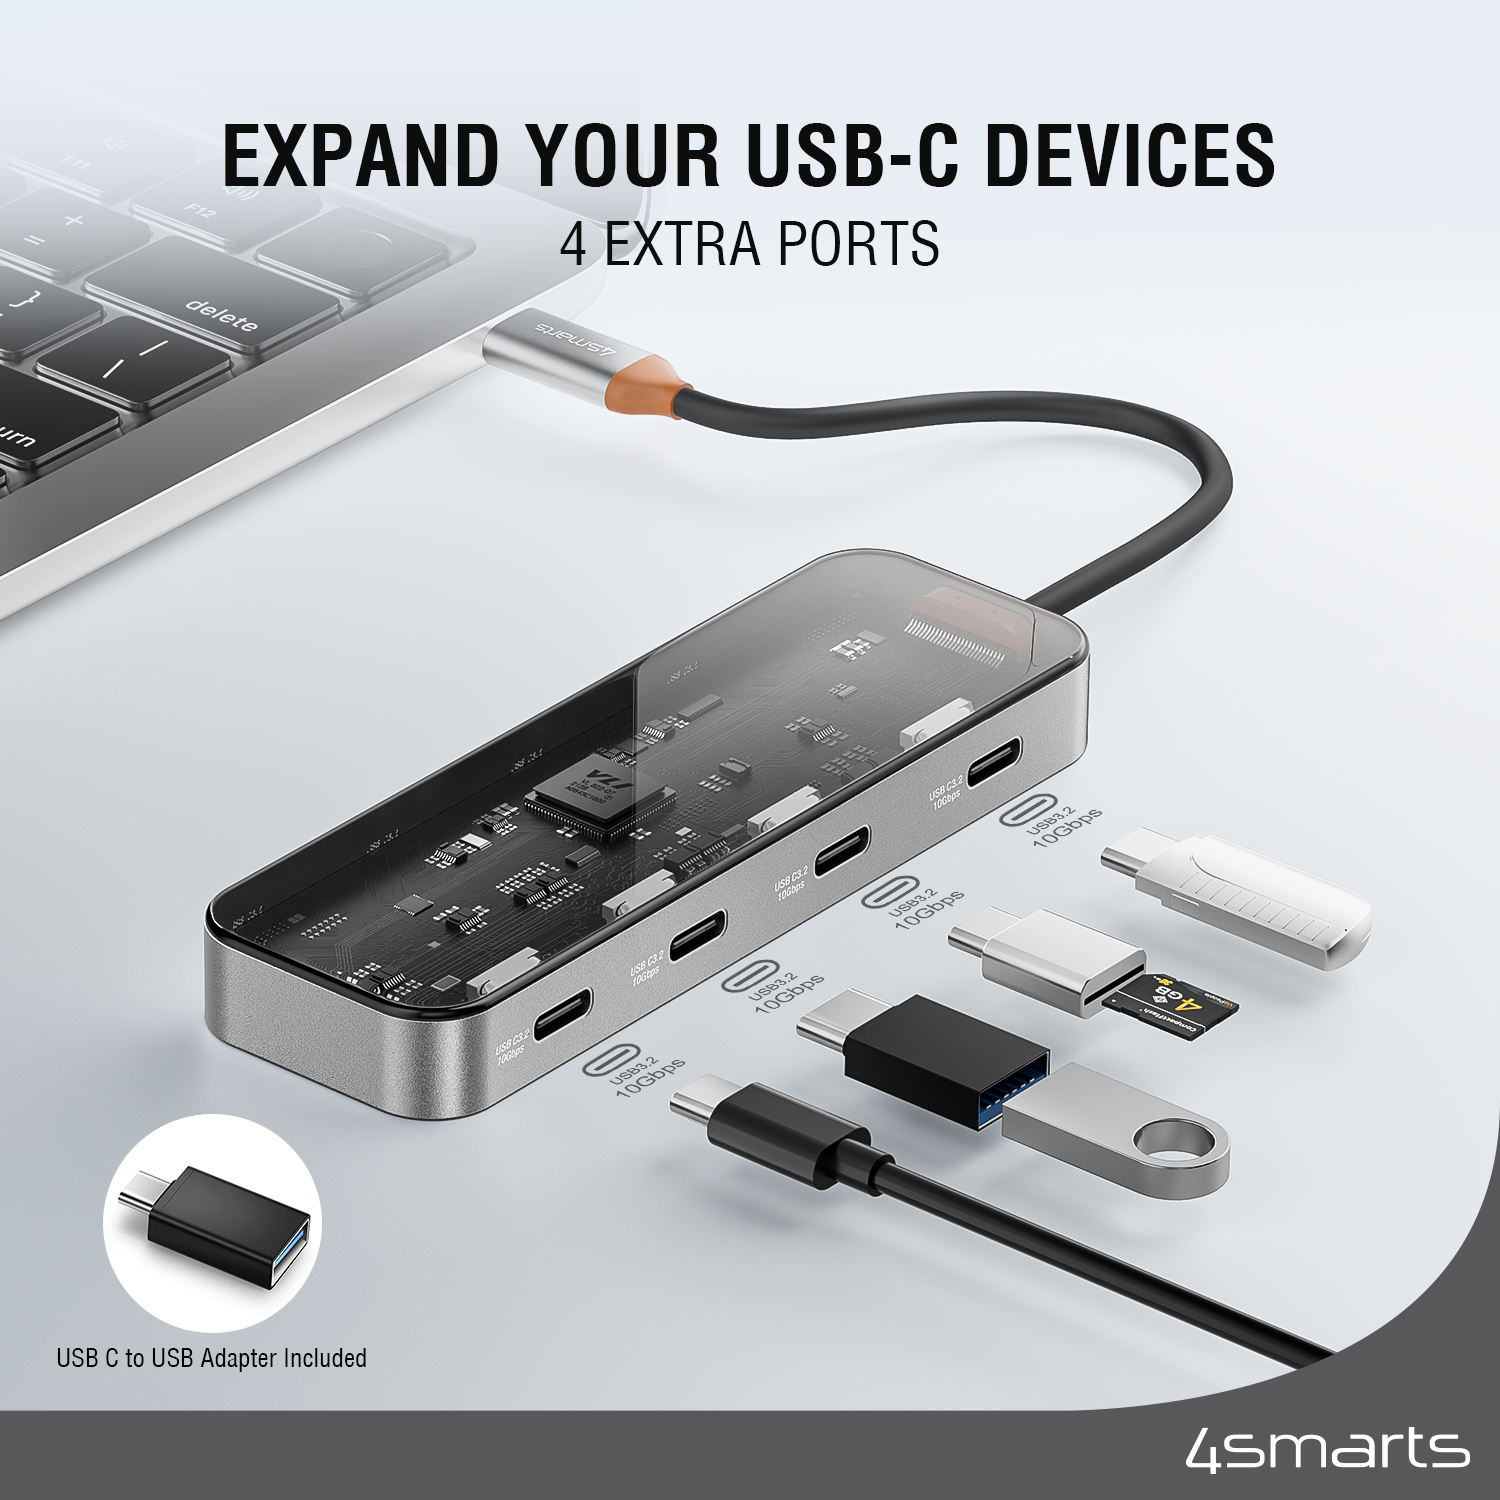 4smarts USB-C Hub expands your devices with 4 additional ports.